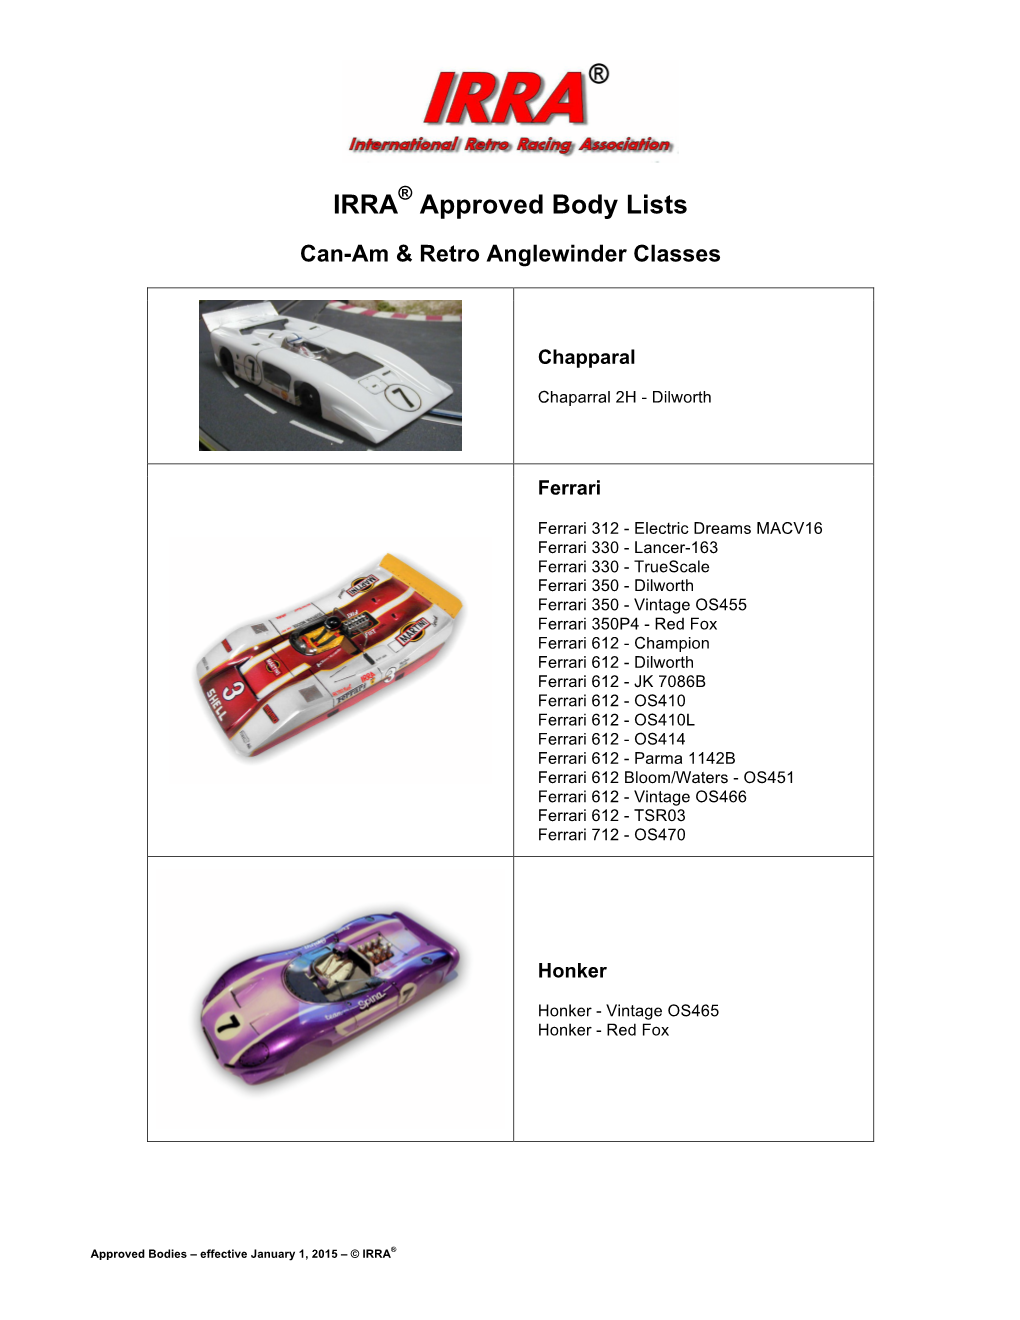 IRRA Approved Body Lists